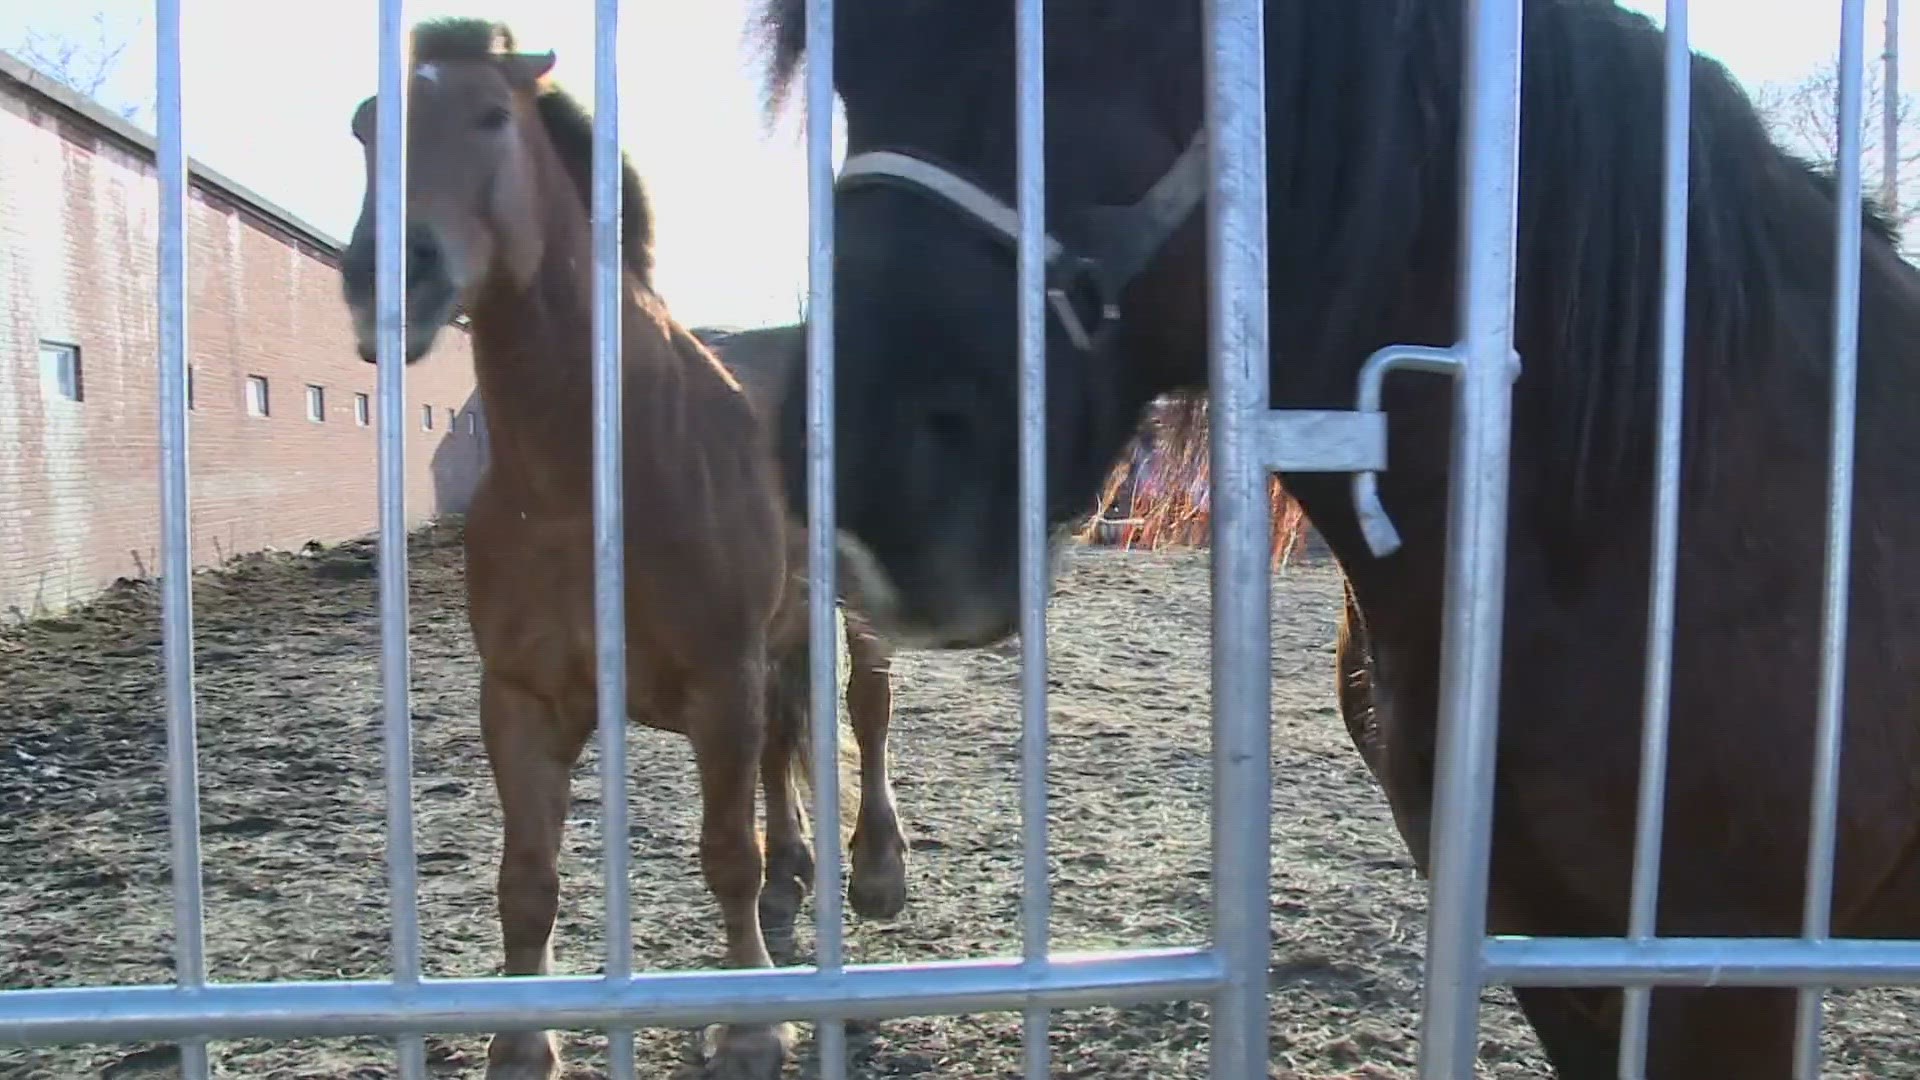 Cleveland police told 3News that the horses escaped during routine care and exercise.